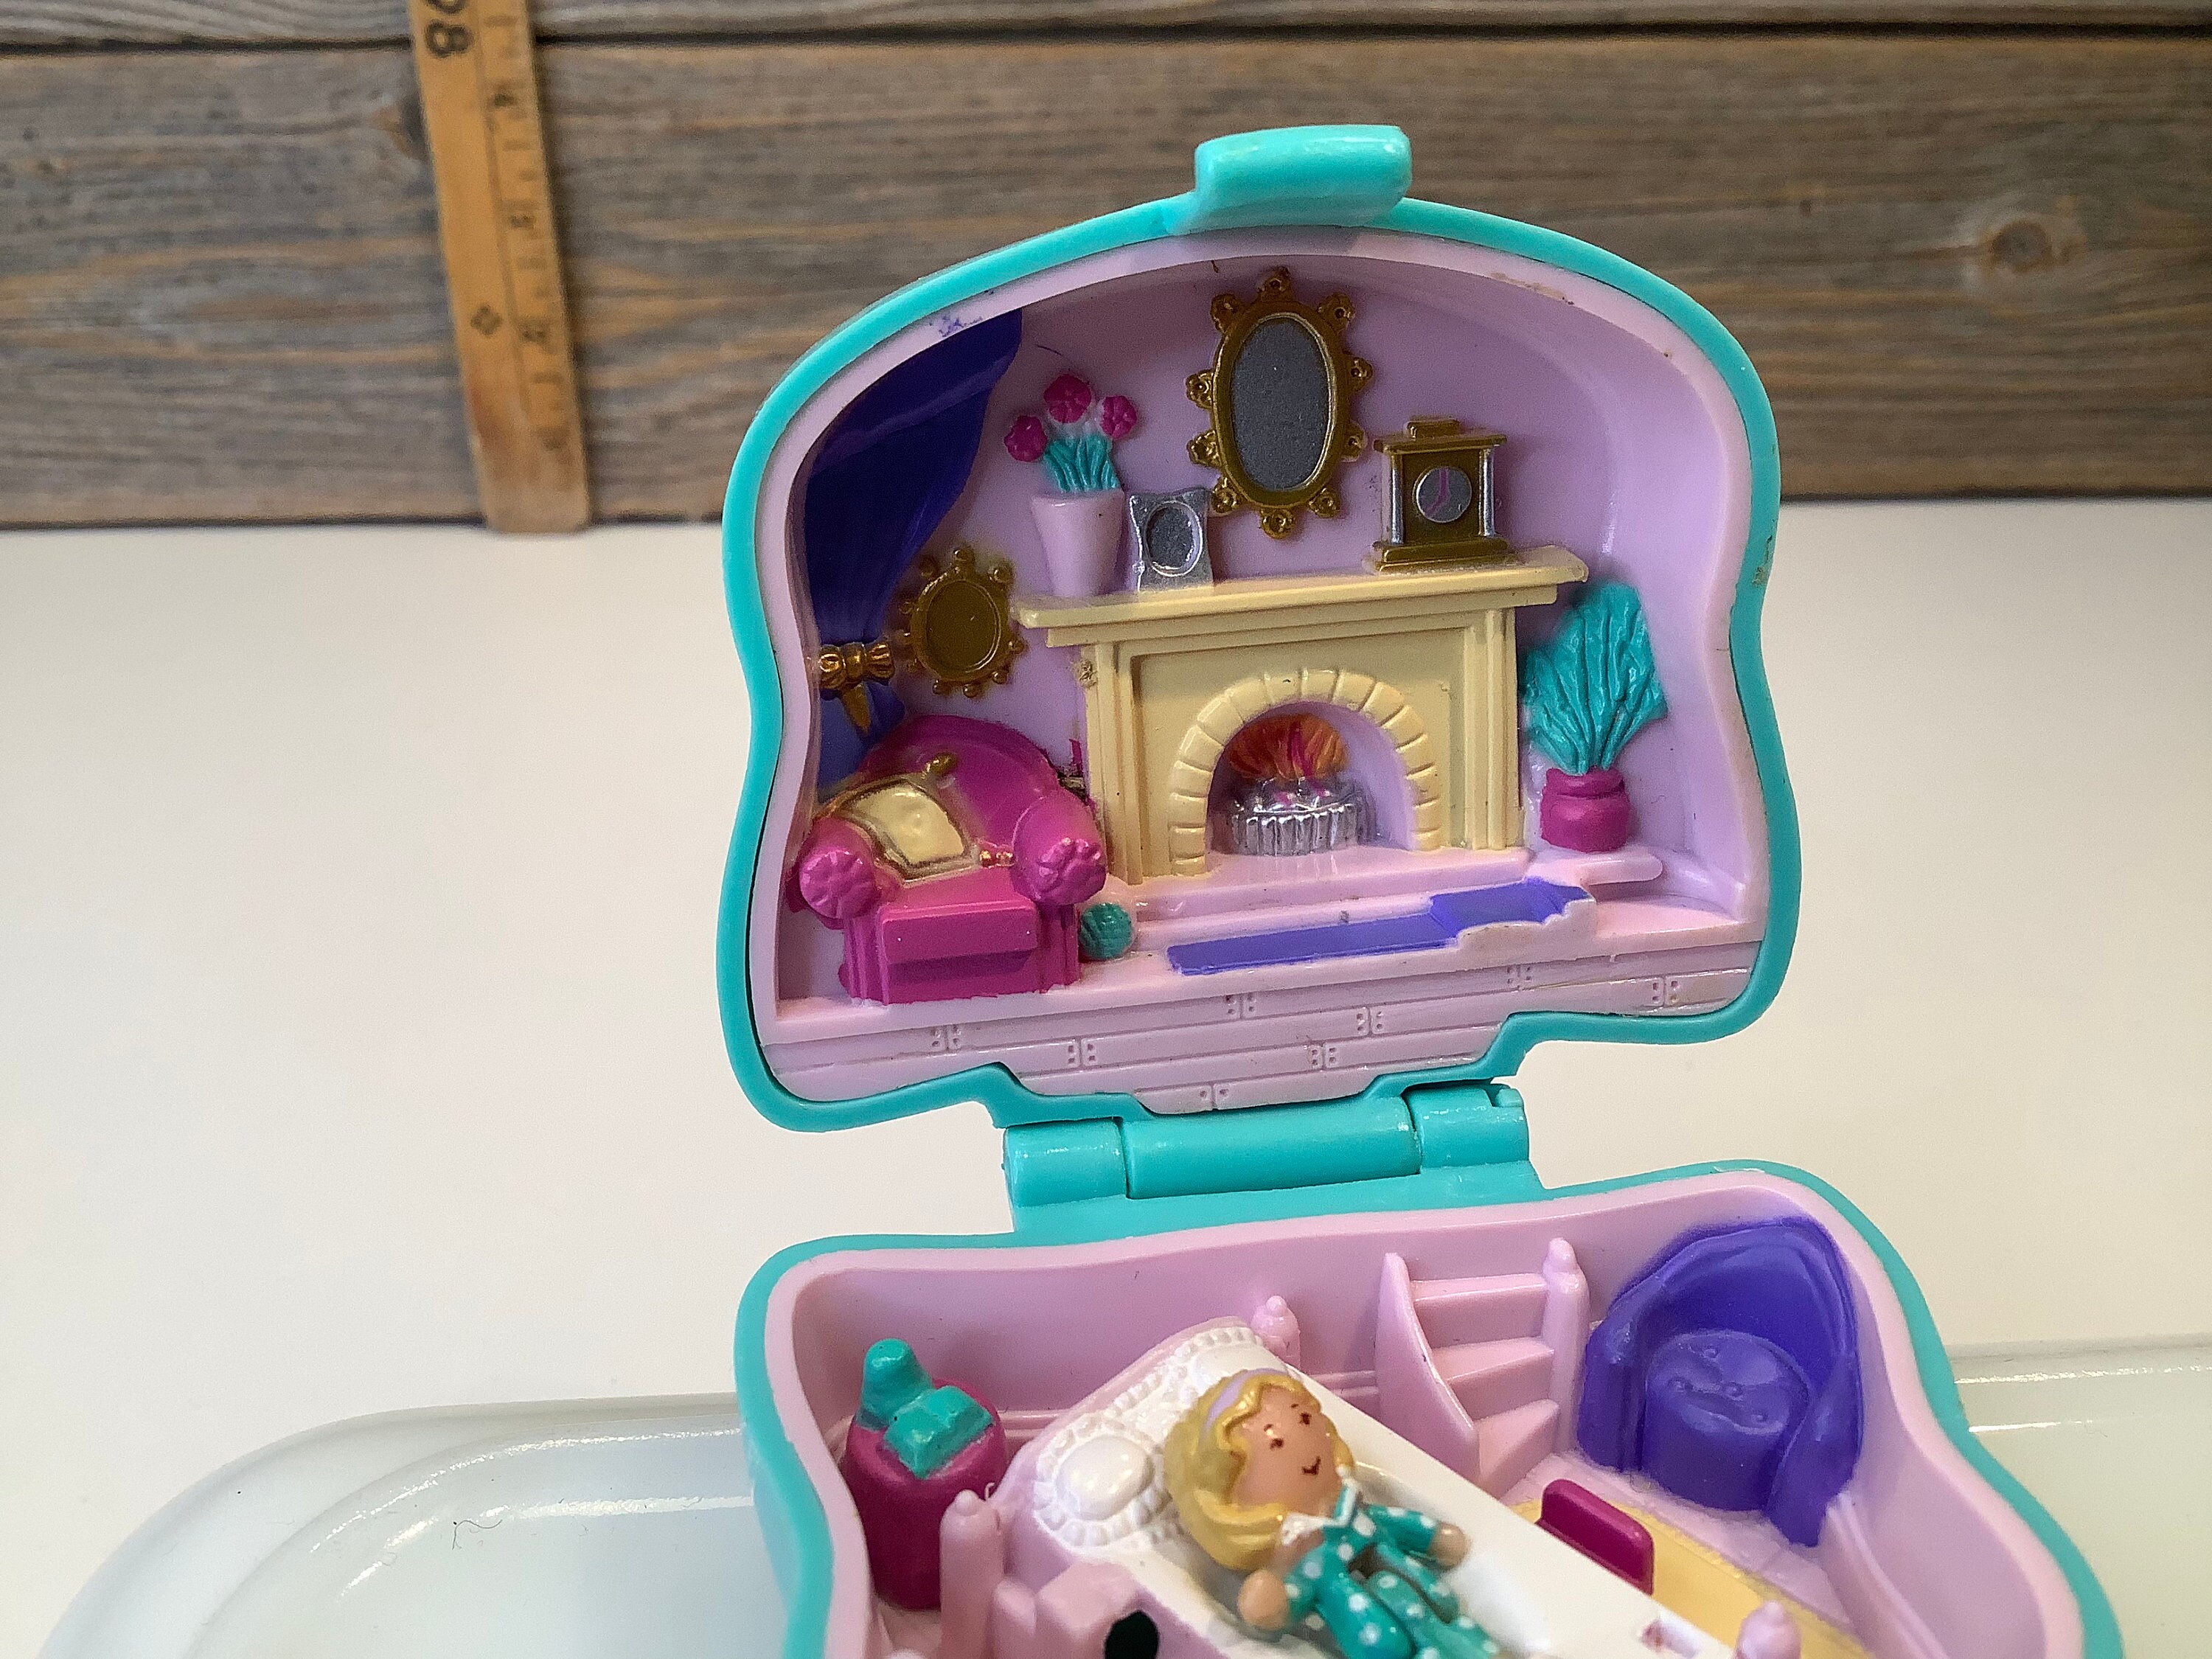 Complete 1993 Polly Pocket Cuddly Kitty Compact Pet Parade Collection,  Vintage Rare Polly Pocket, Complete in Great Condition, Bluebird Toys 